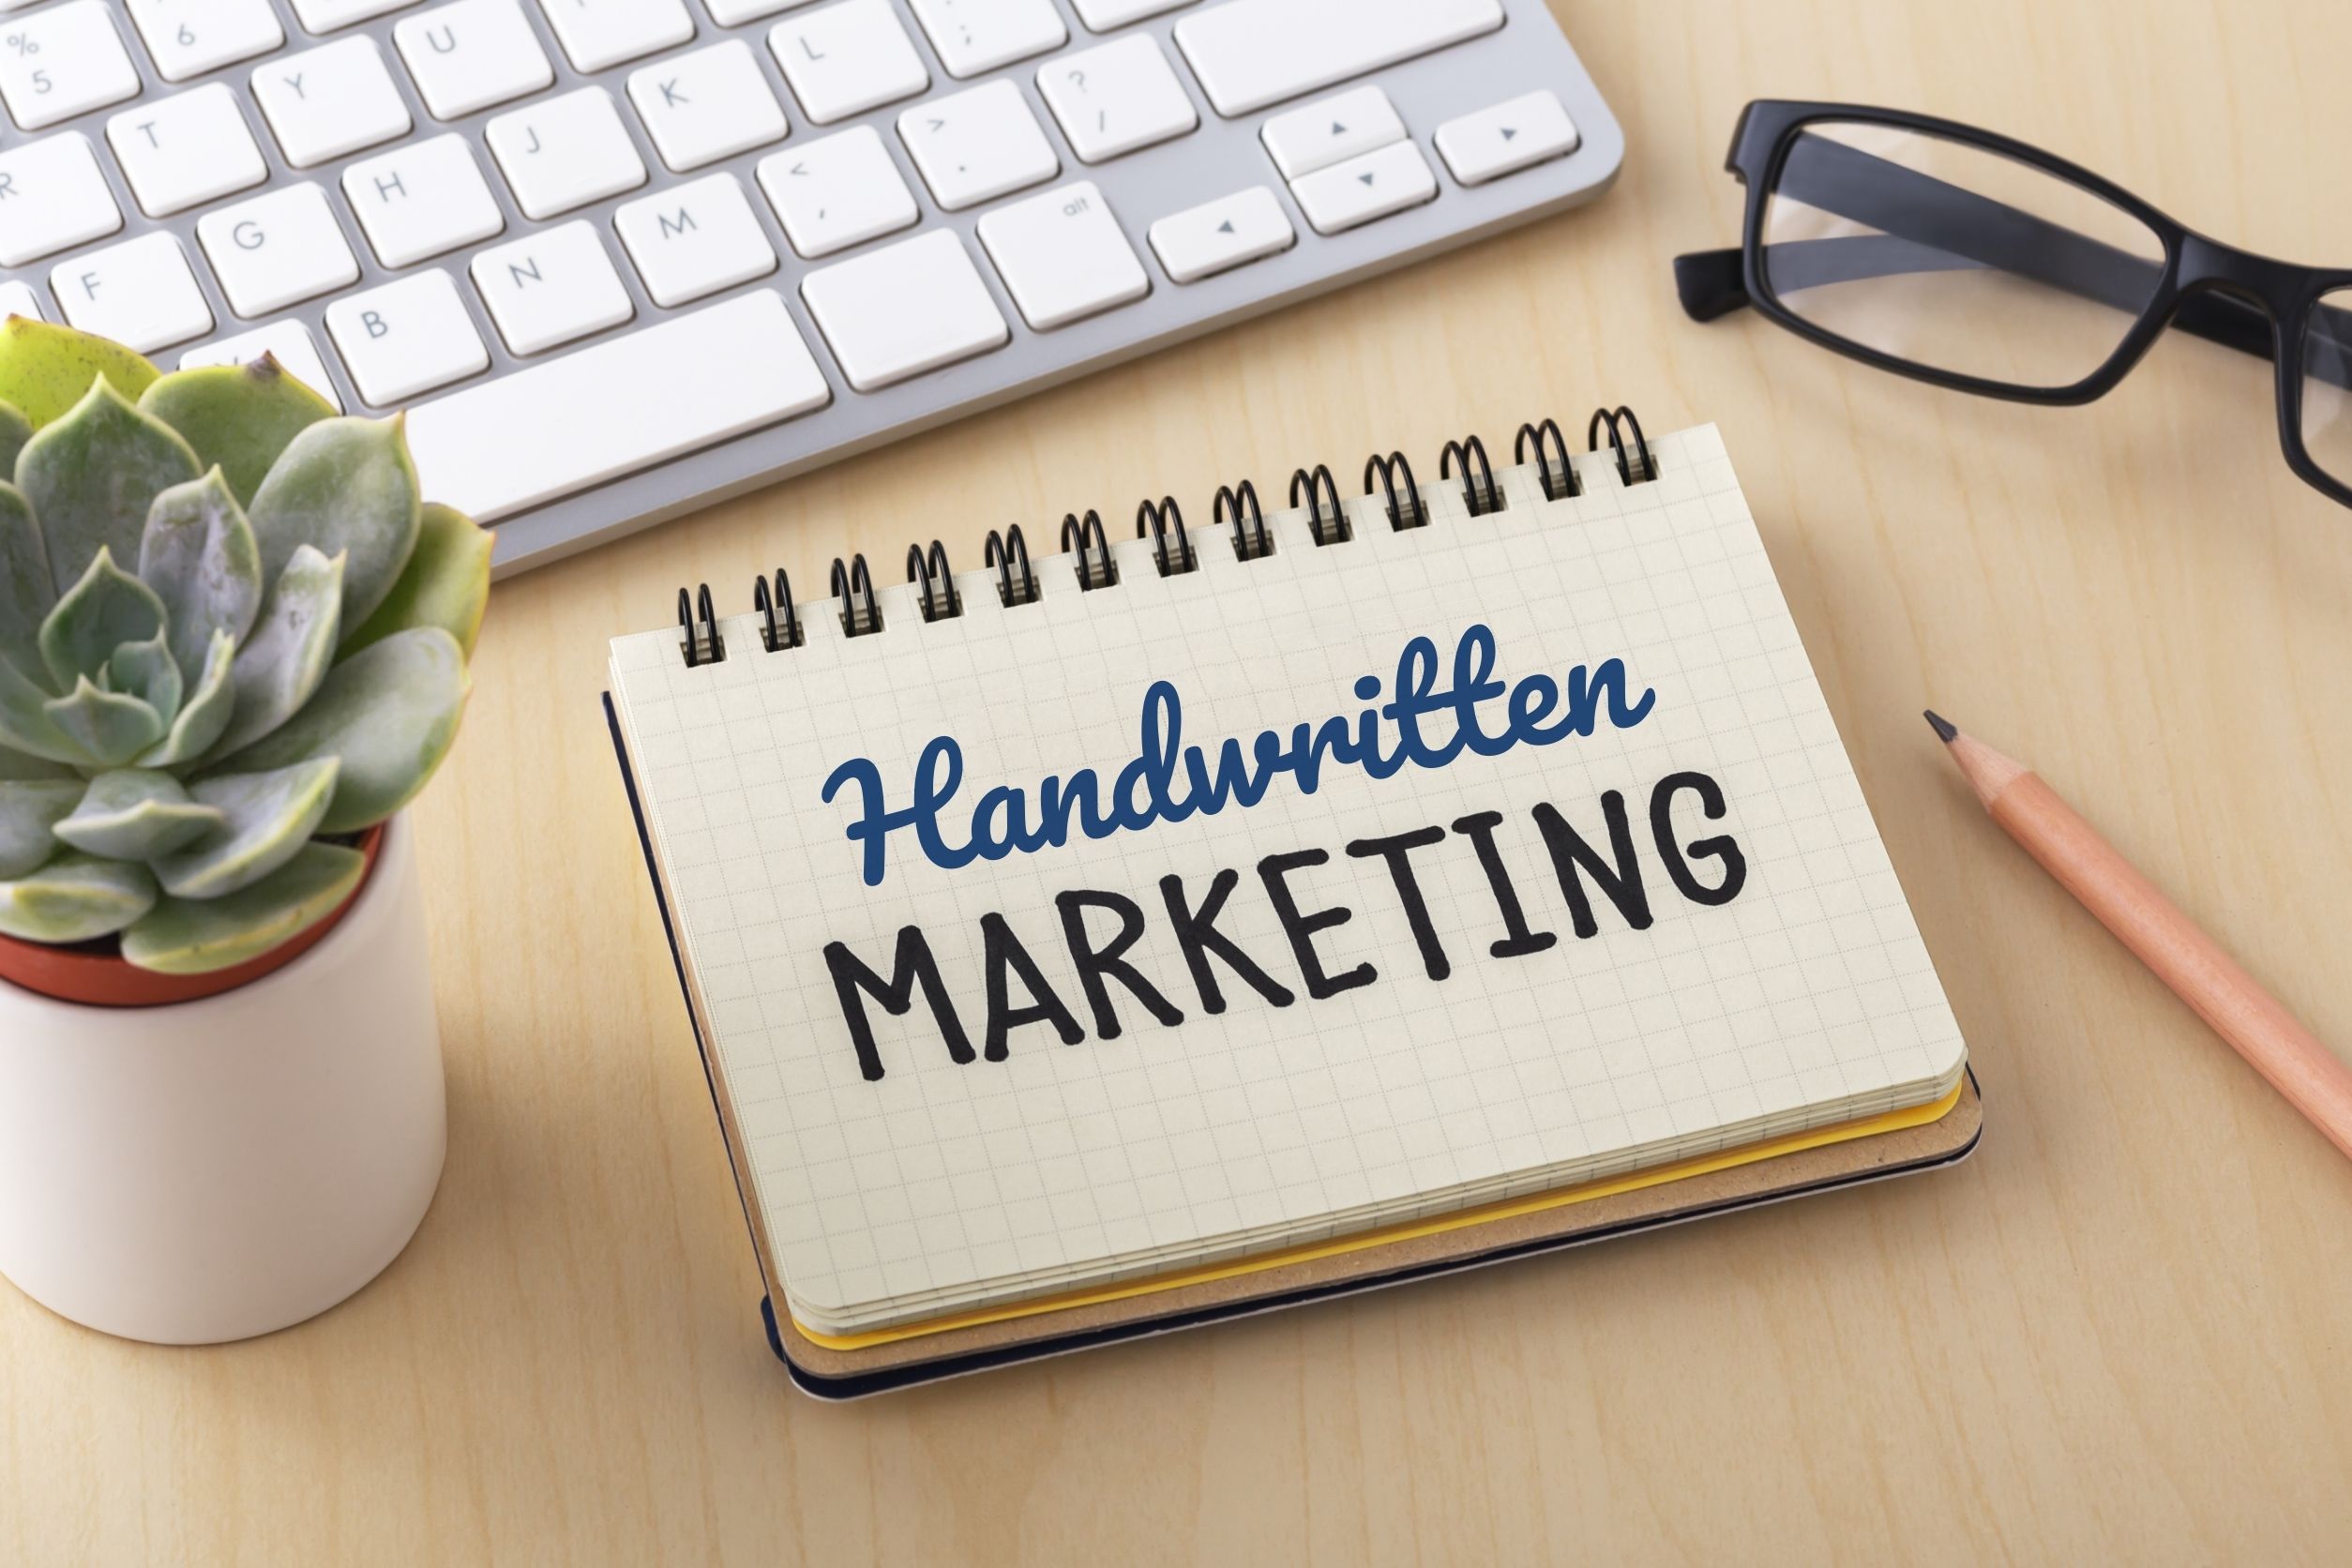 handwritten marketing written in notebook that is next to plant, glasses, pencil, and keyboard